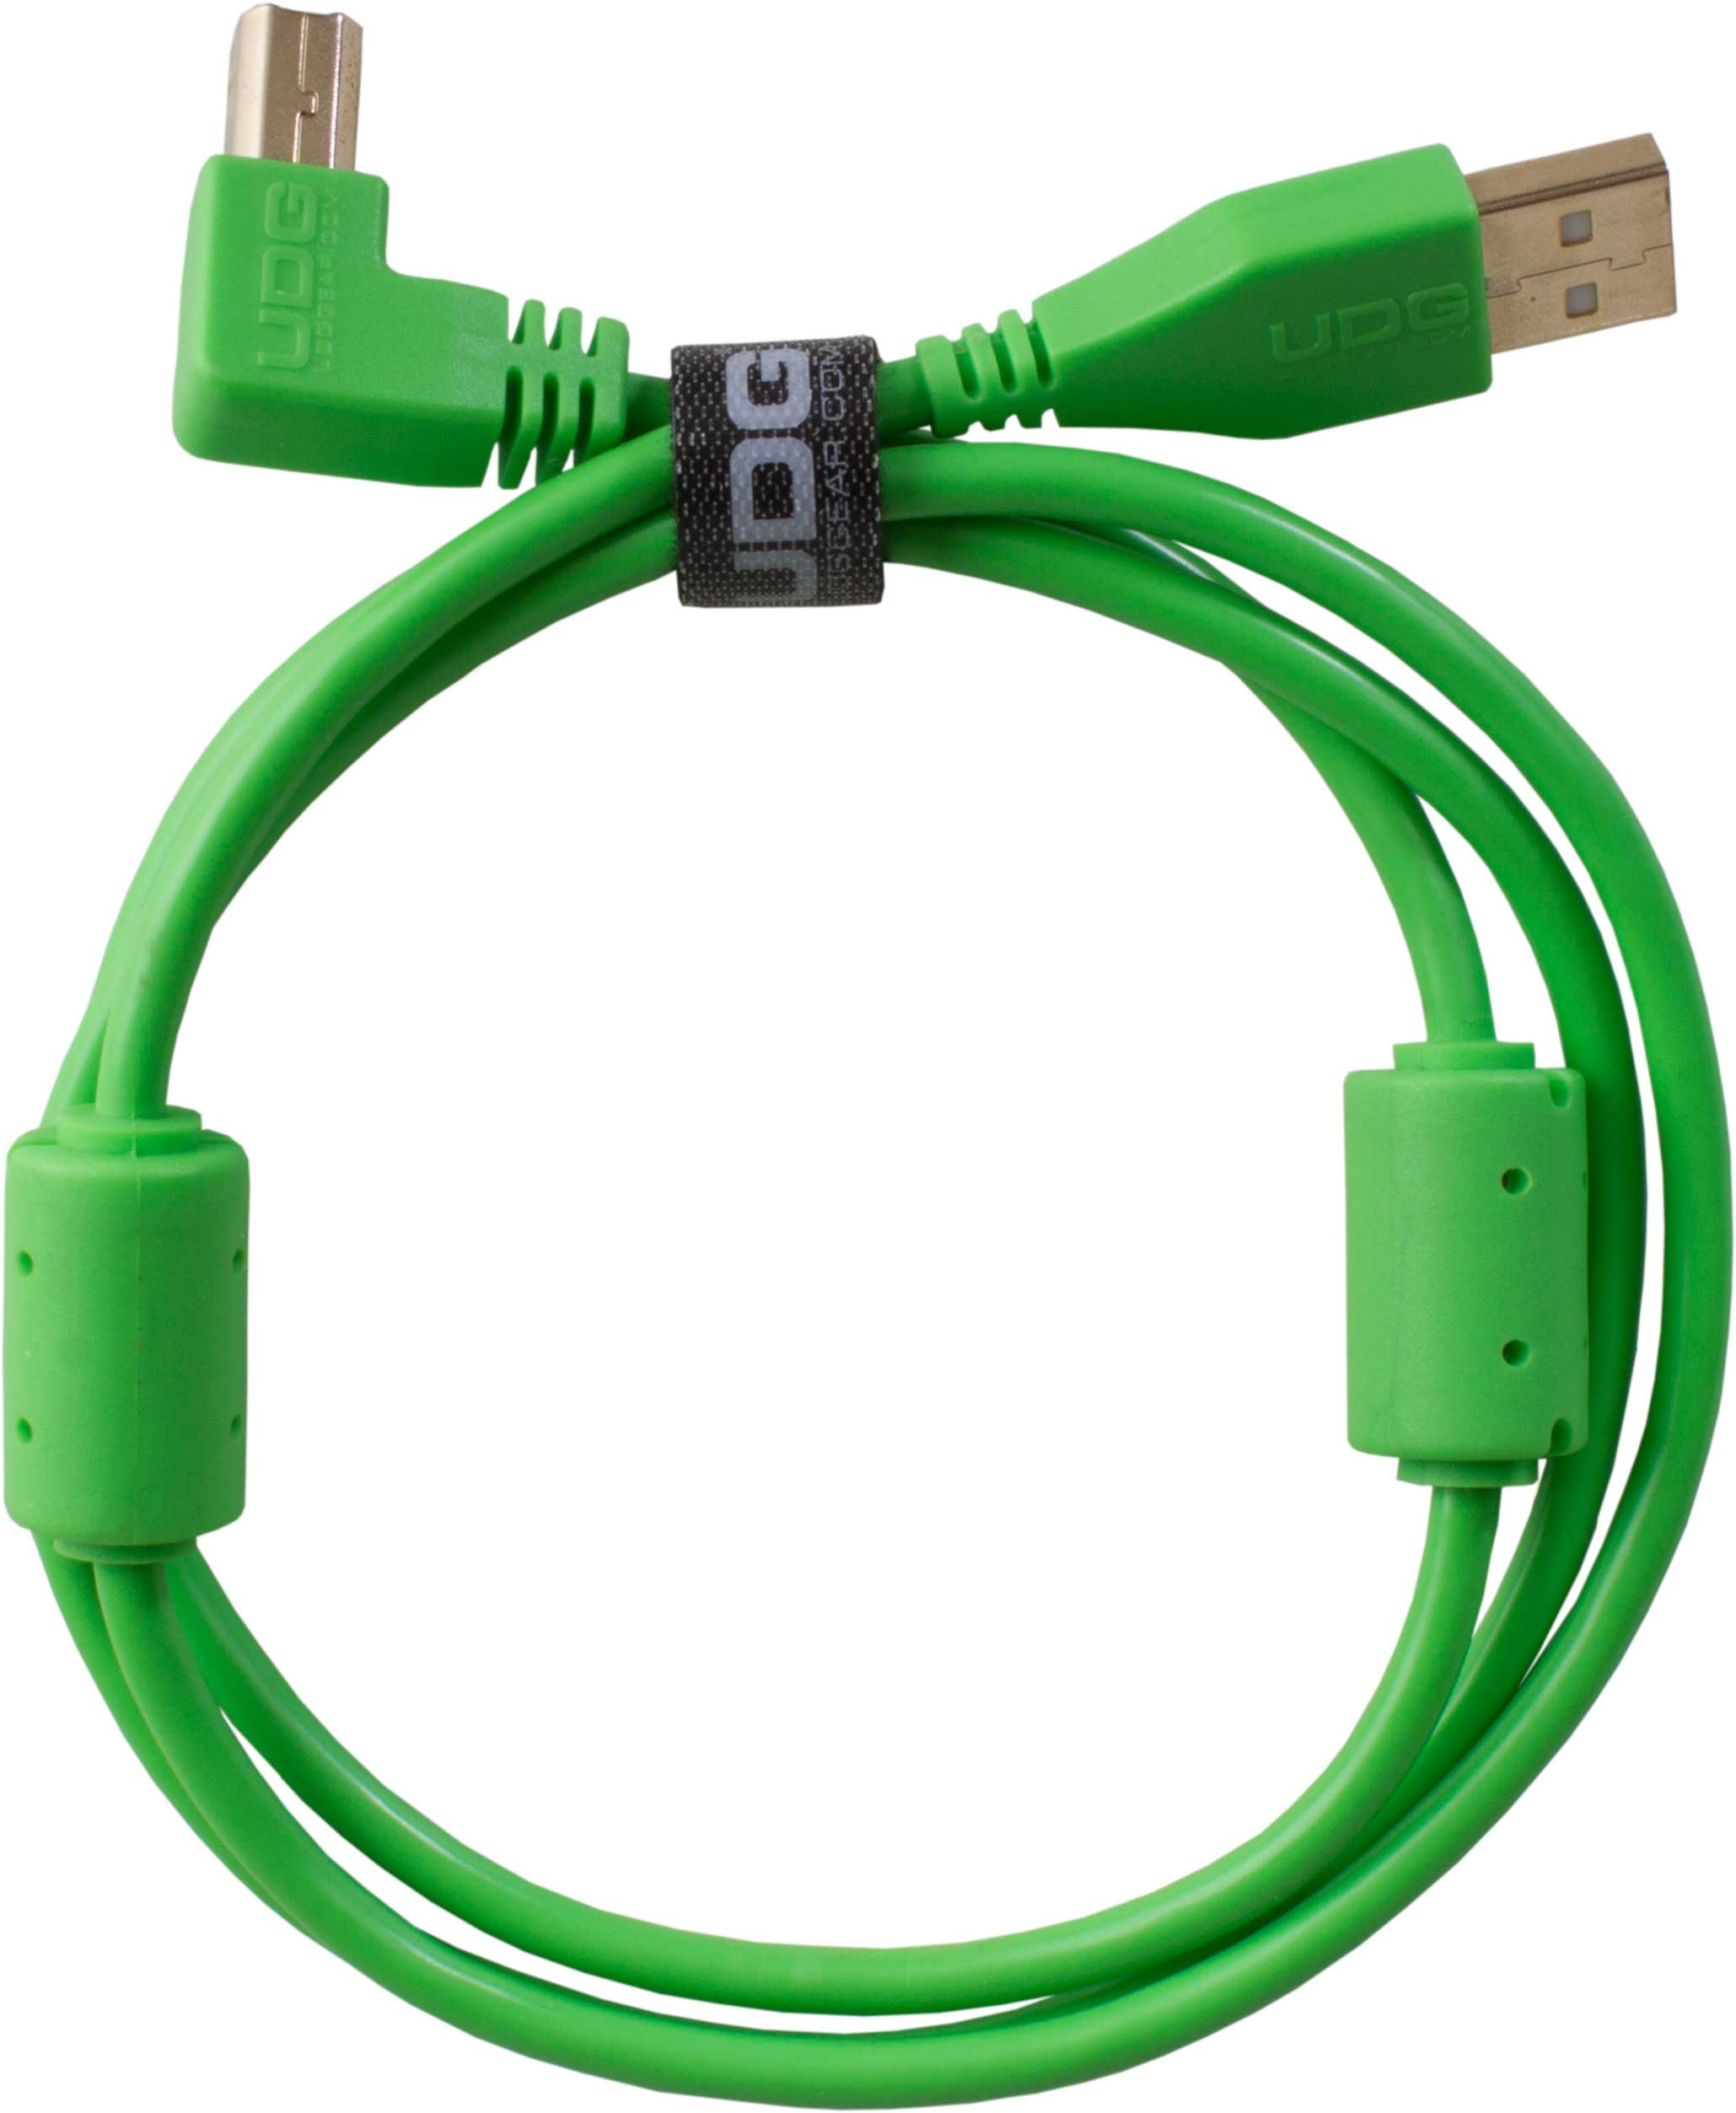 UDG U95004GR - ULTIMATE AUDIO CABLE USB 2.0 A-B GREEN ANGLED 1M